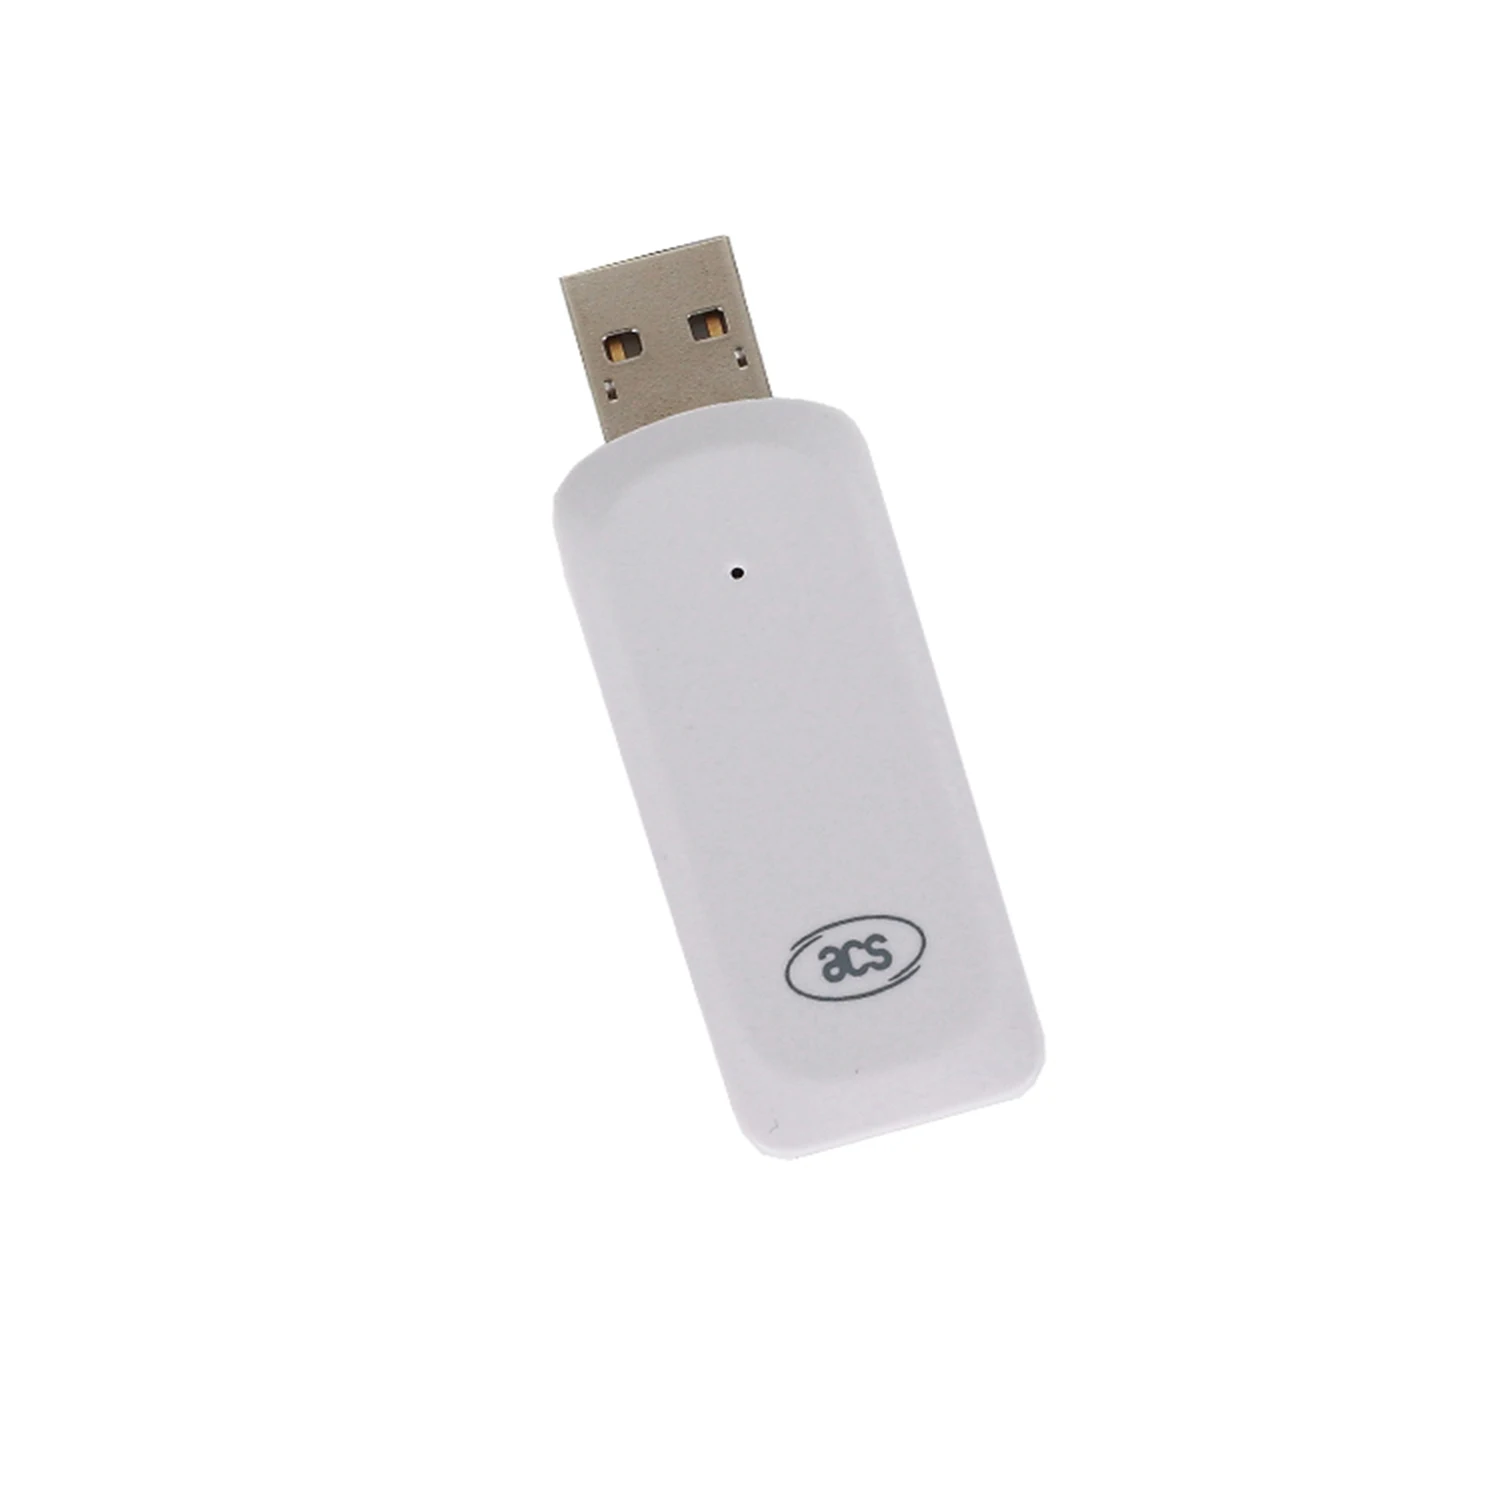 

ROHS Plug-in (SIM-Sized) ISO7816 Card Reader Support SIM-sized cards ACR38T-D1